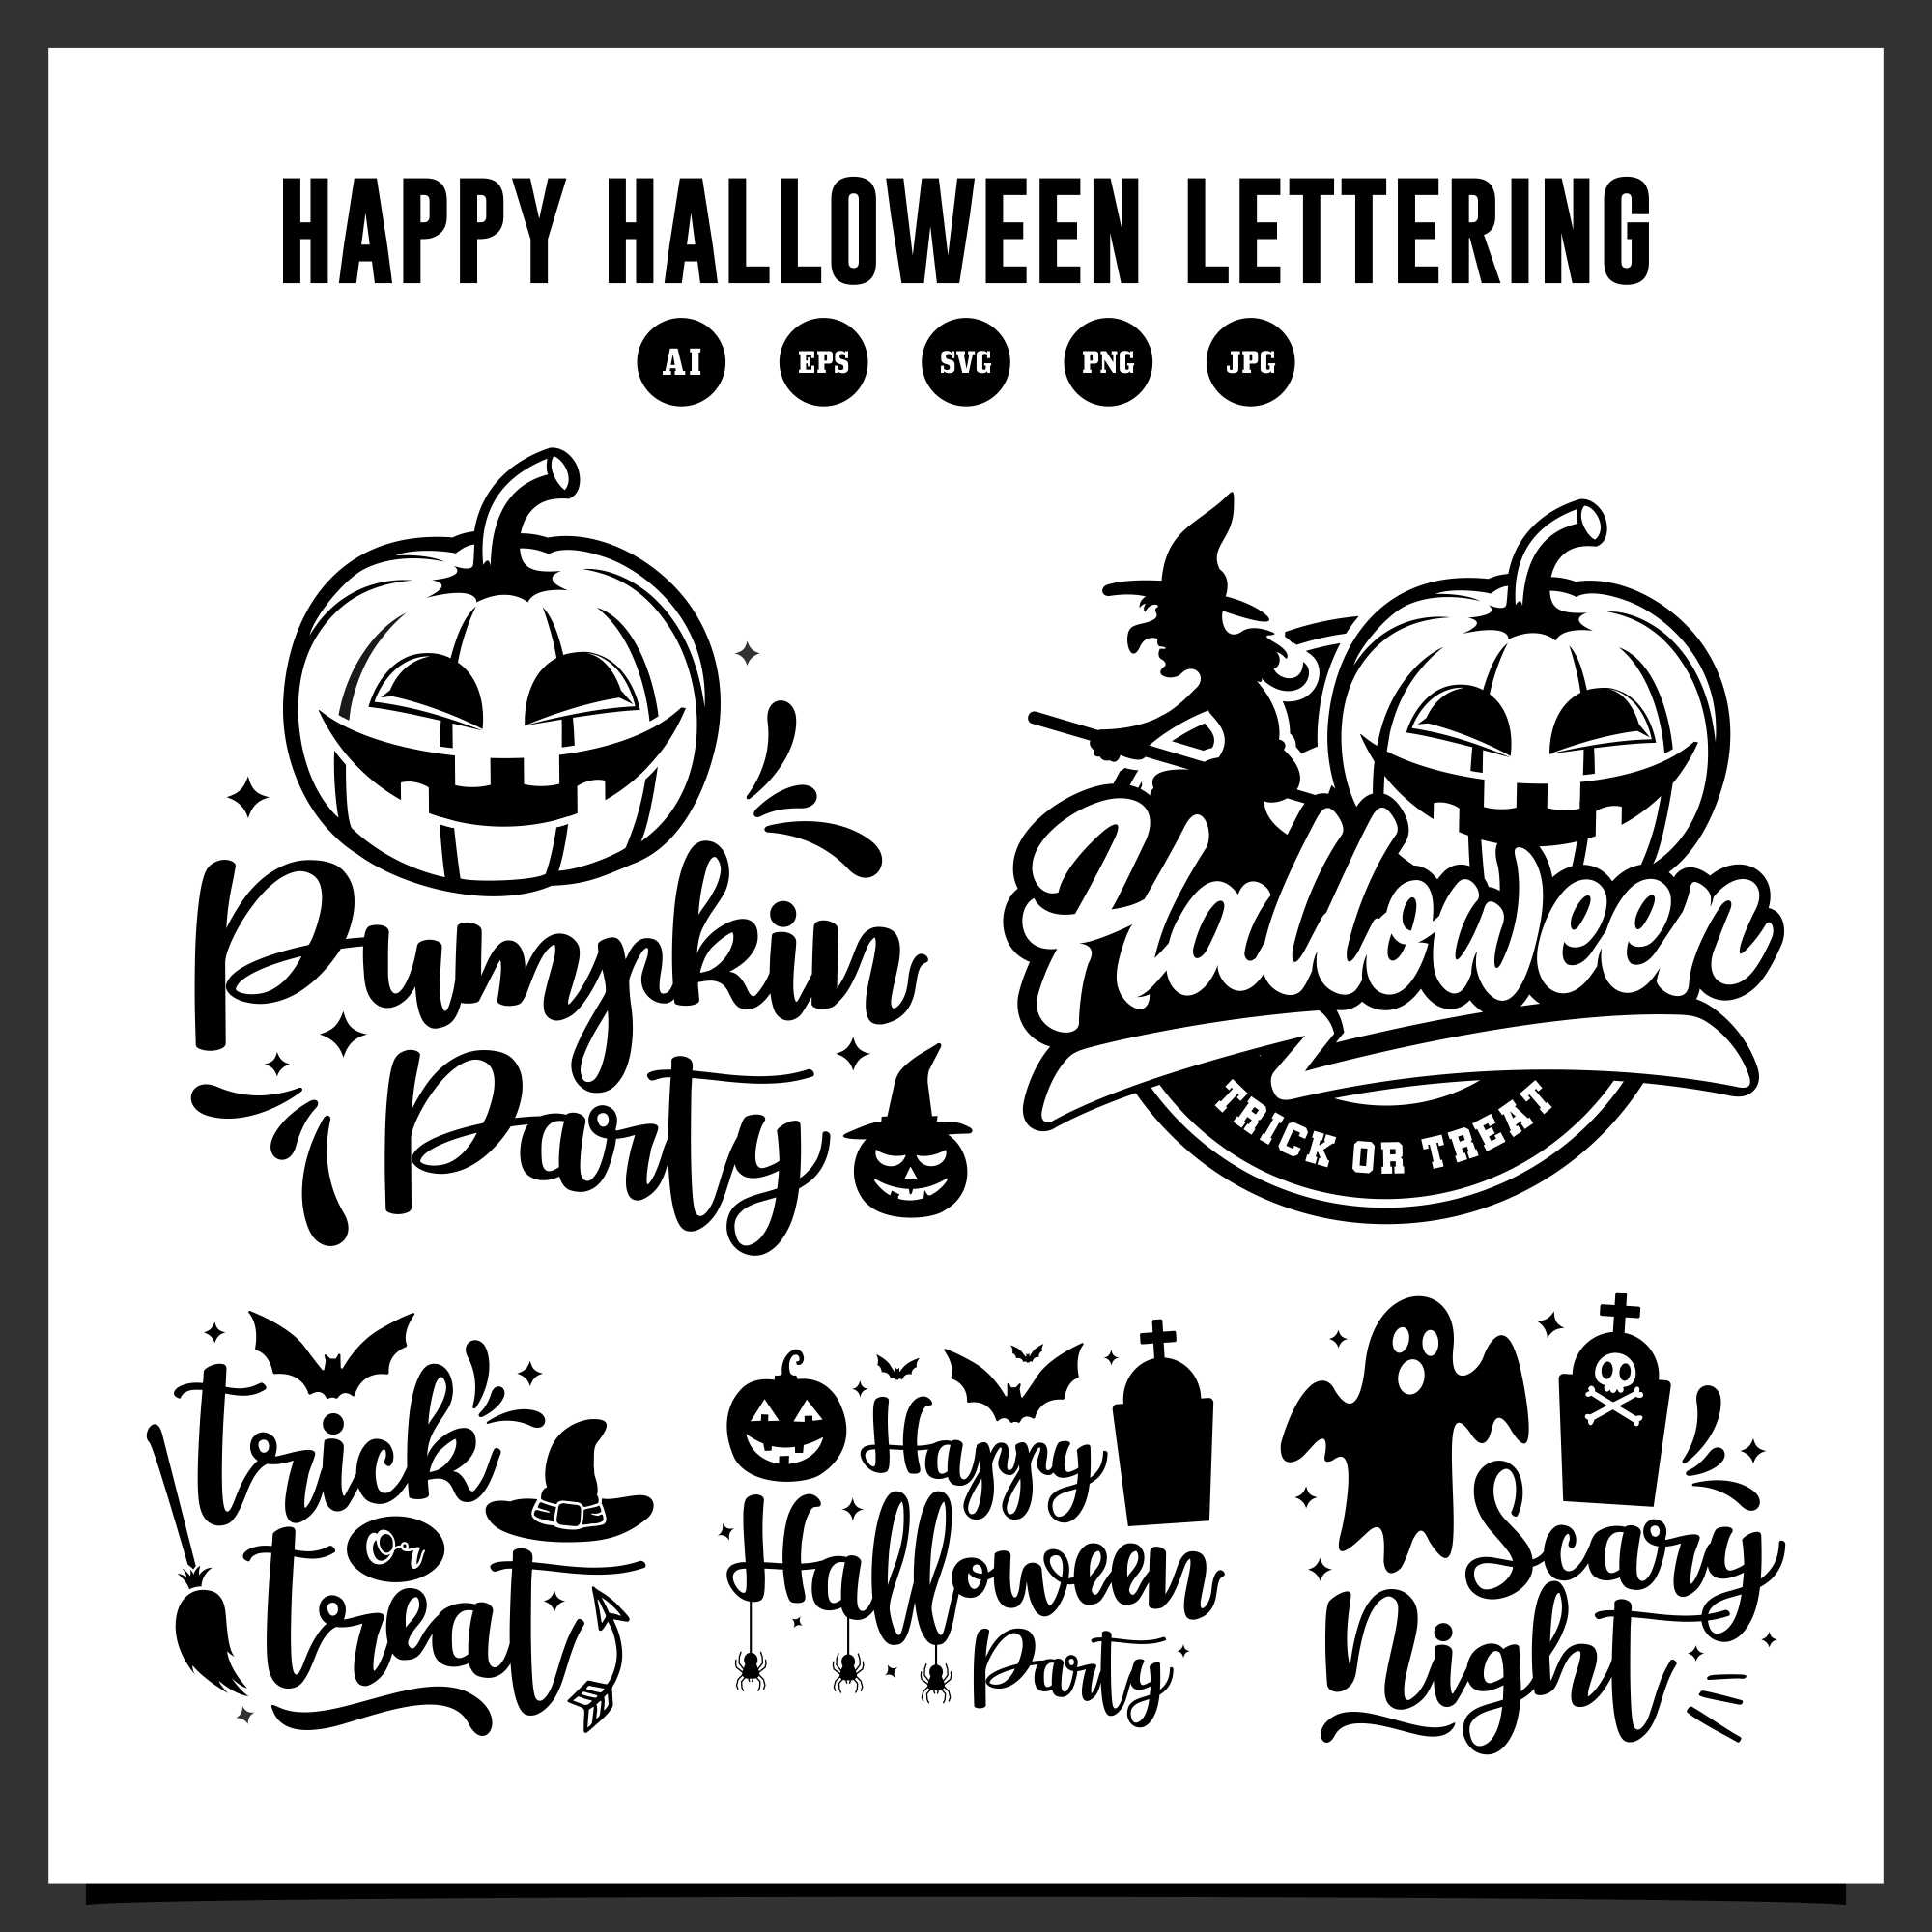 5 Happy halloween lettering design collection - $6 cover image.